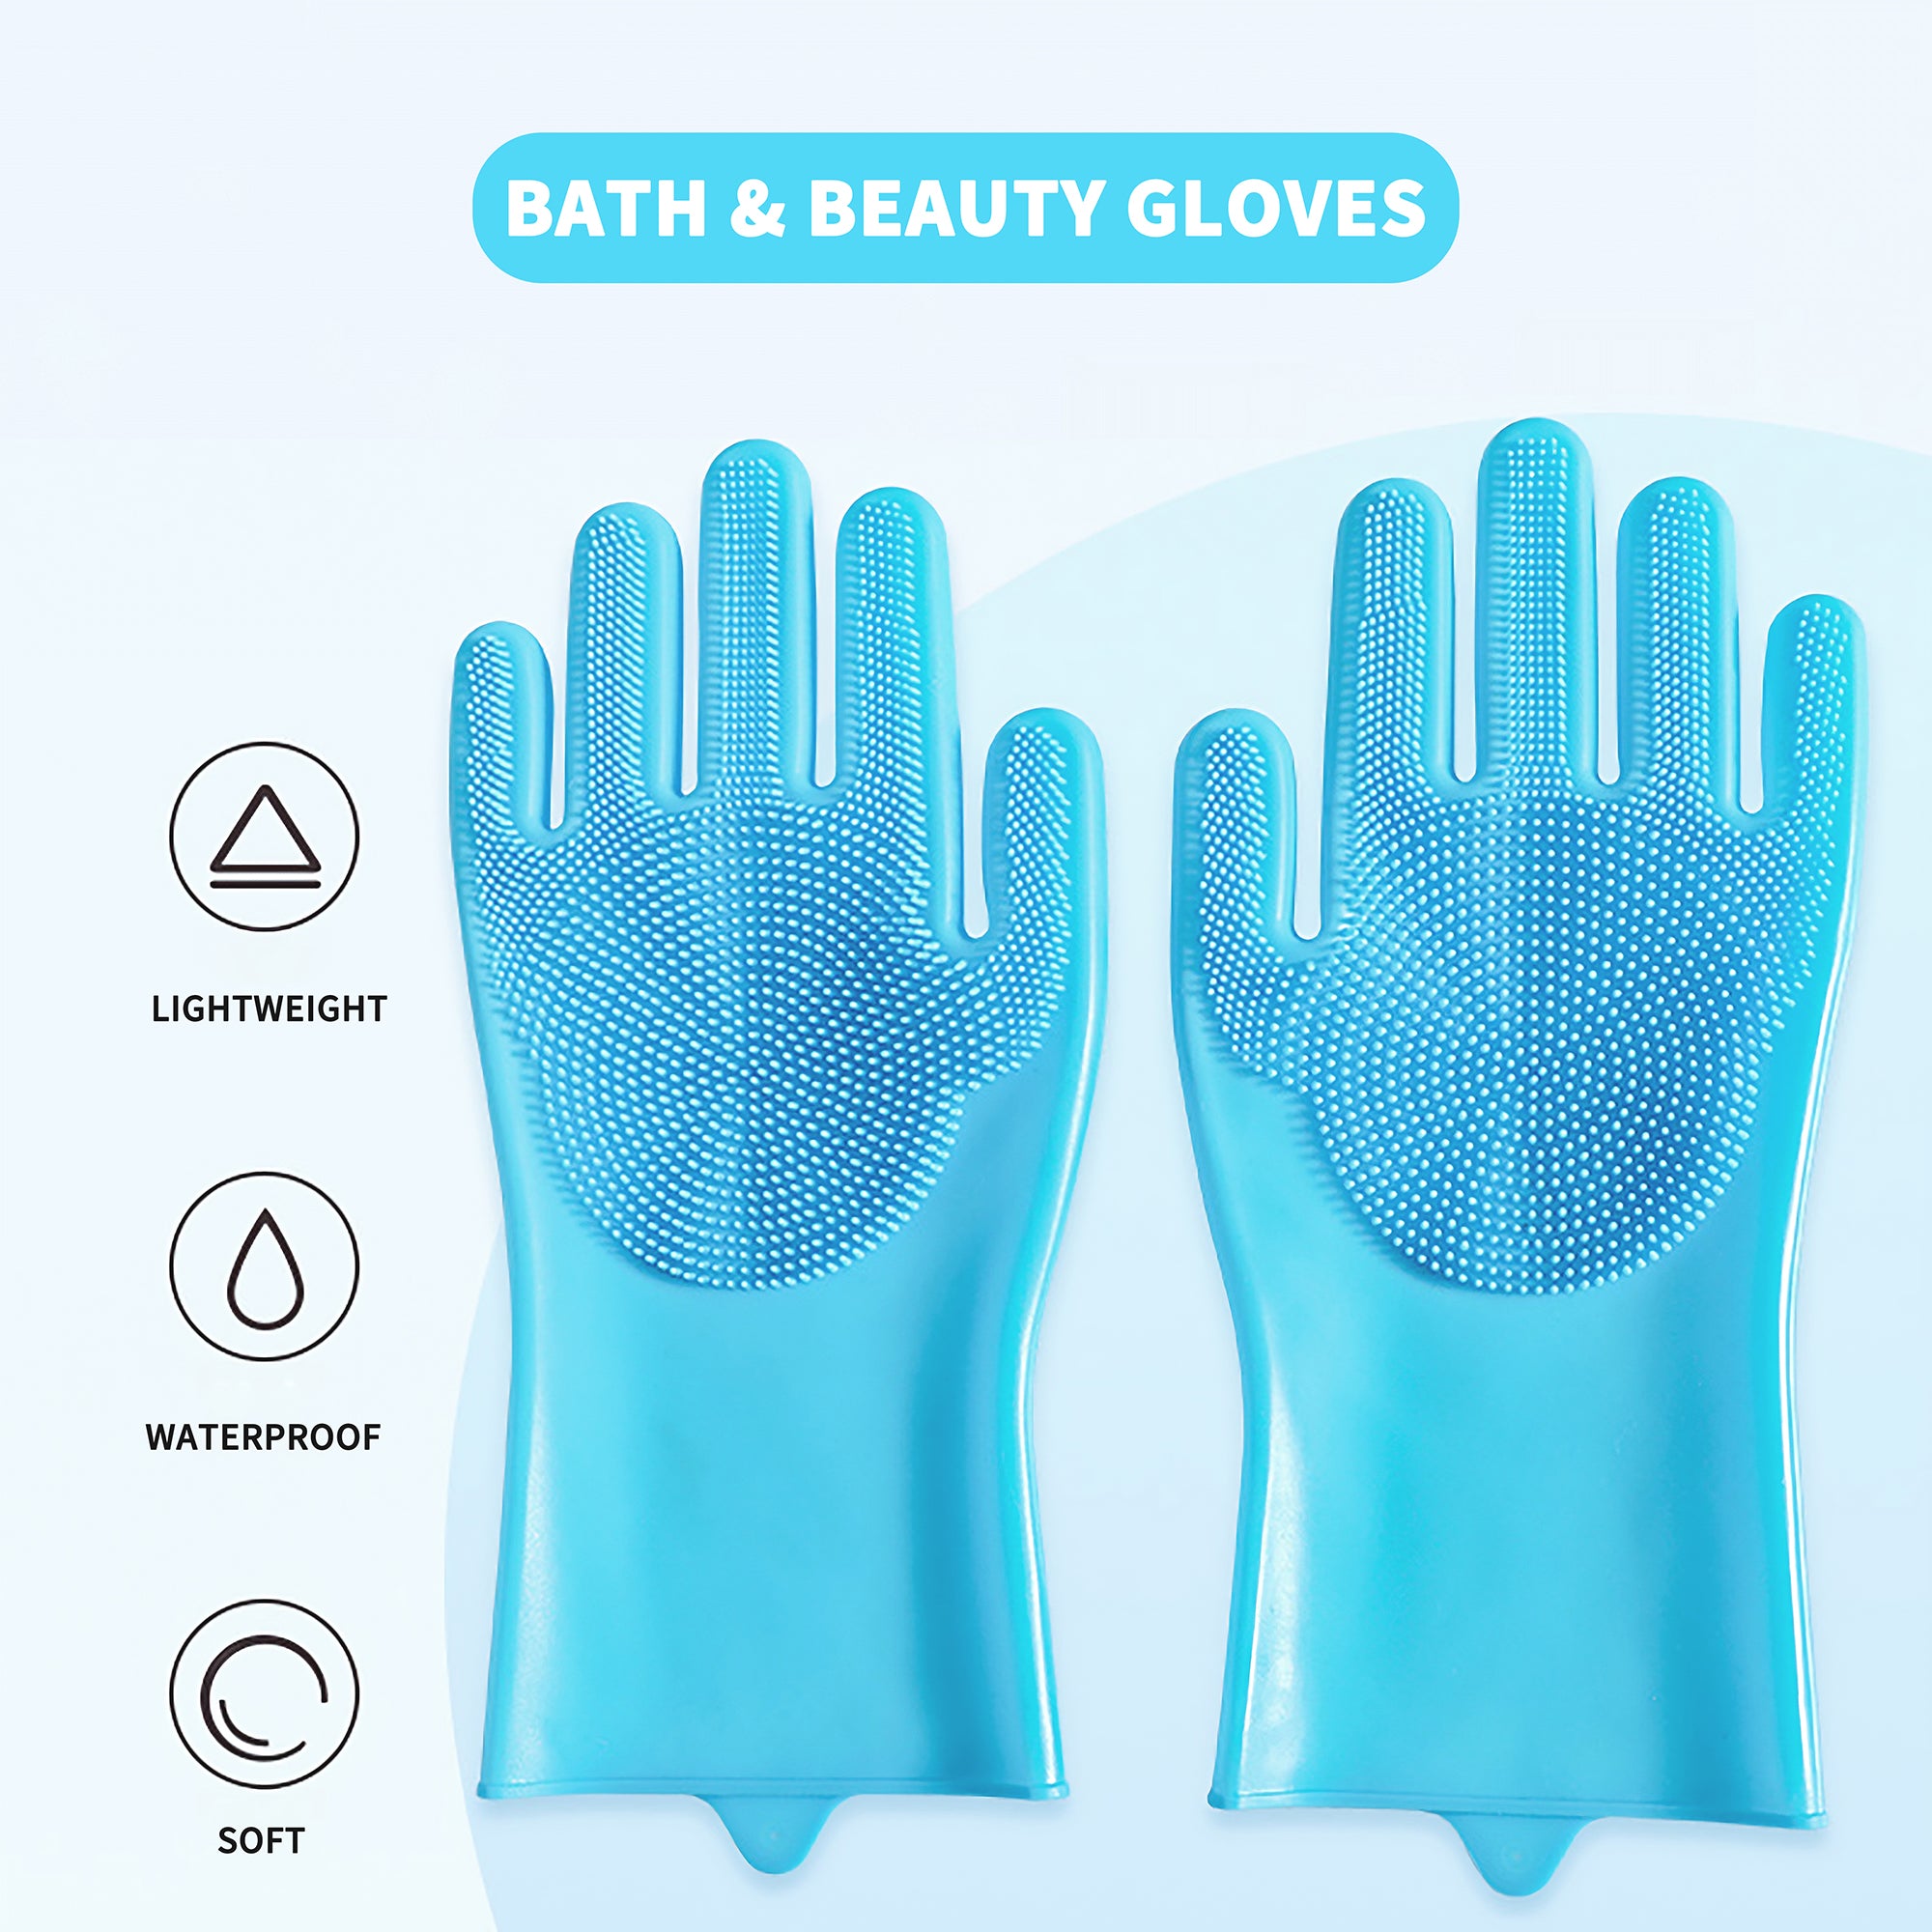 Pet Grooming Gloves - Cats Deshedding and Hair Removal Mittens - Dogs Bathing and Cleaning Massaging Brushes Gloves